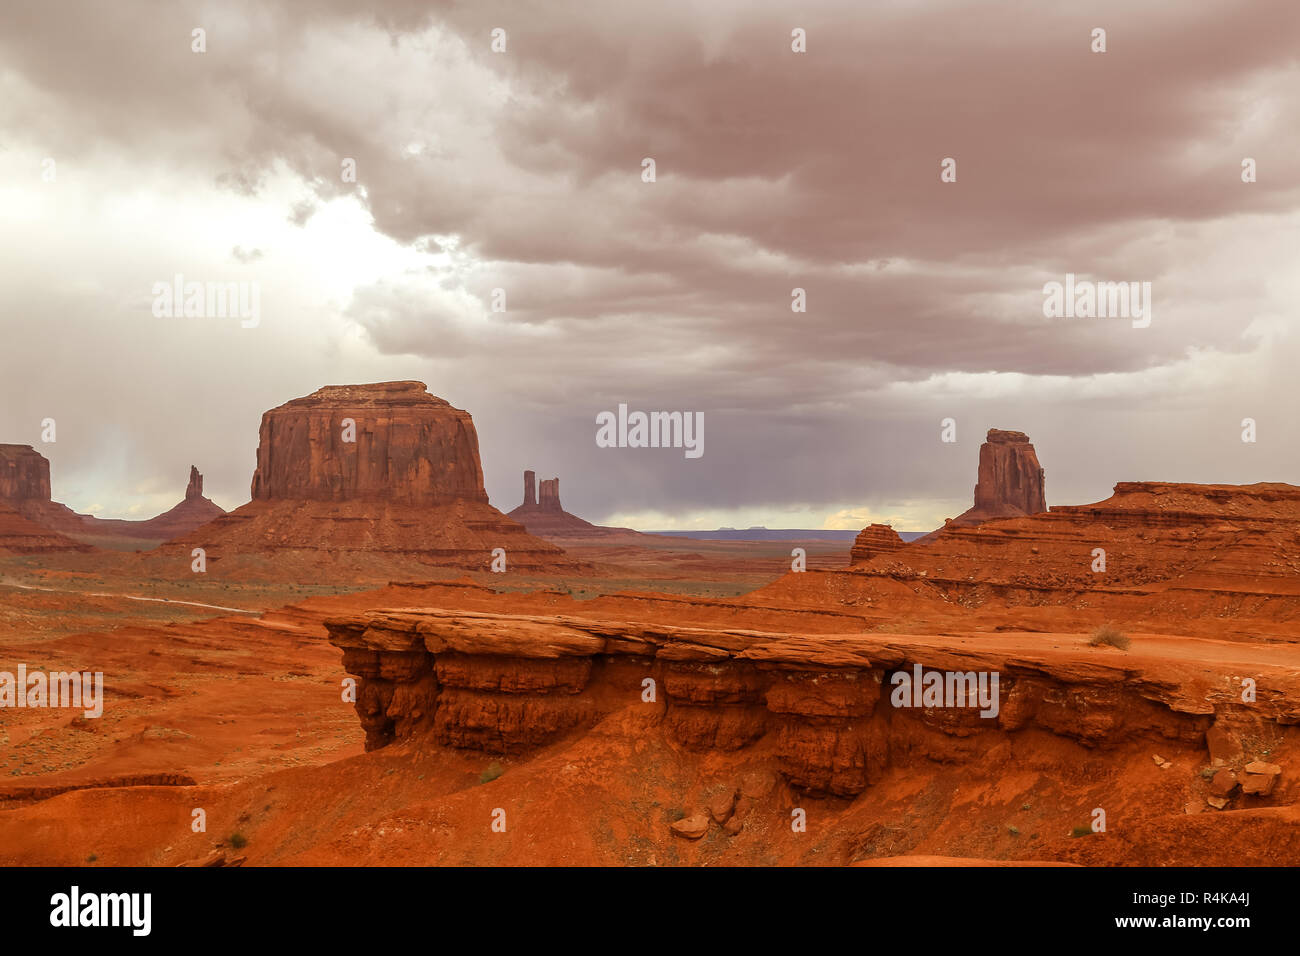 movies john ford point with a dramatic stormy sky in the desert of oljato monument valley at the border arizona and utah in the american west Stock Photo